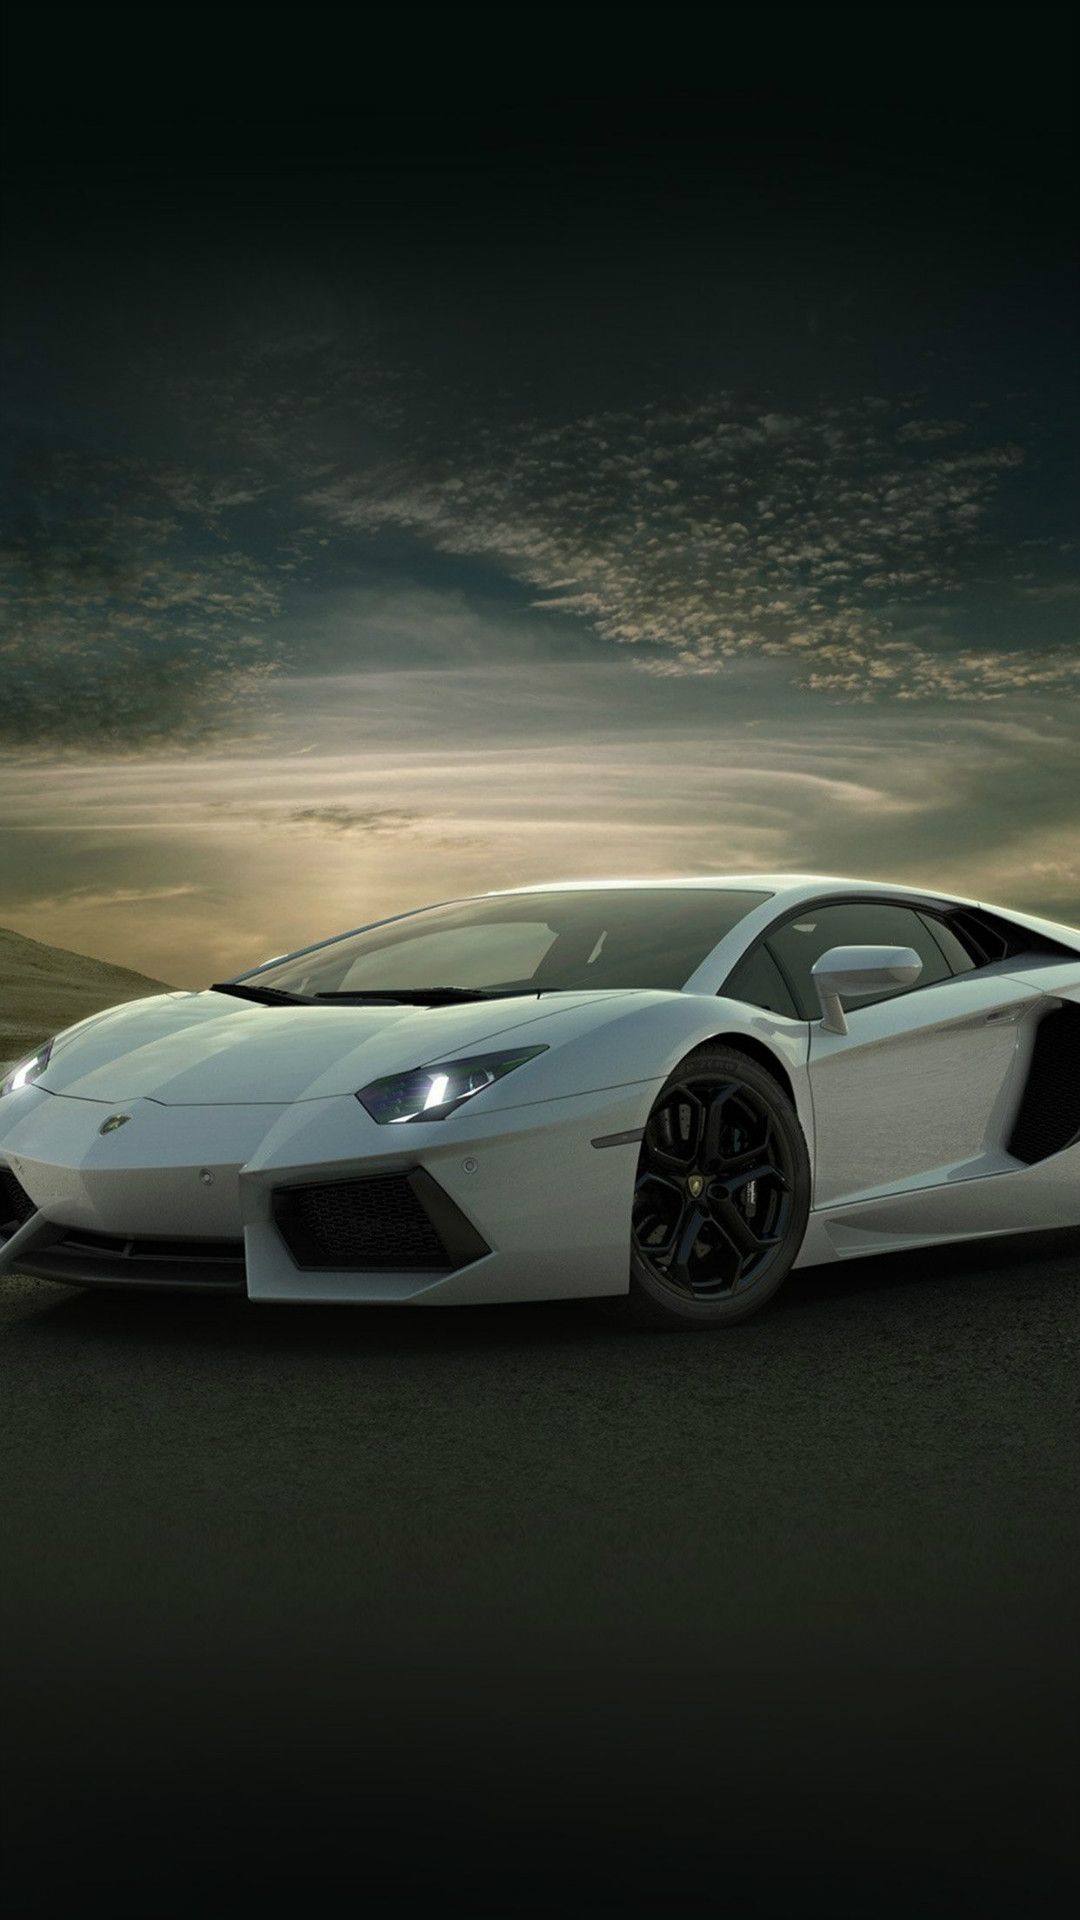 The BEST 12 WALLPAPER latest iPhone iPhone11 Pro, iPhone 12 Pro Max mobile phone HD wallpaper. Lamborghini cars, Car iphone wallpaper, Sports car wallpaper